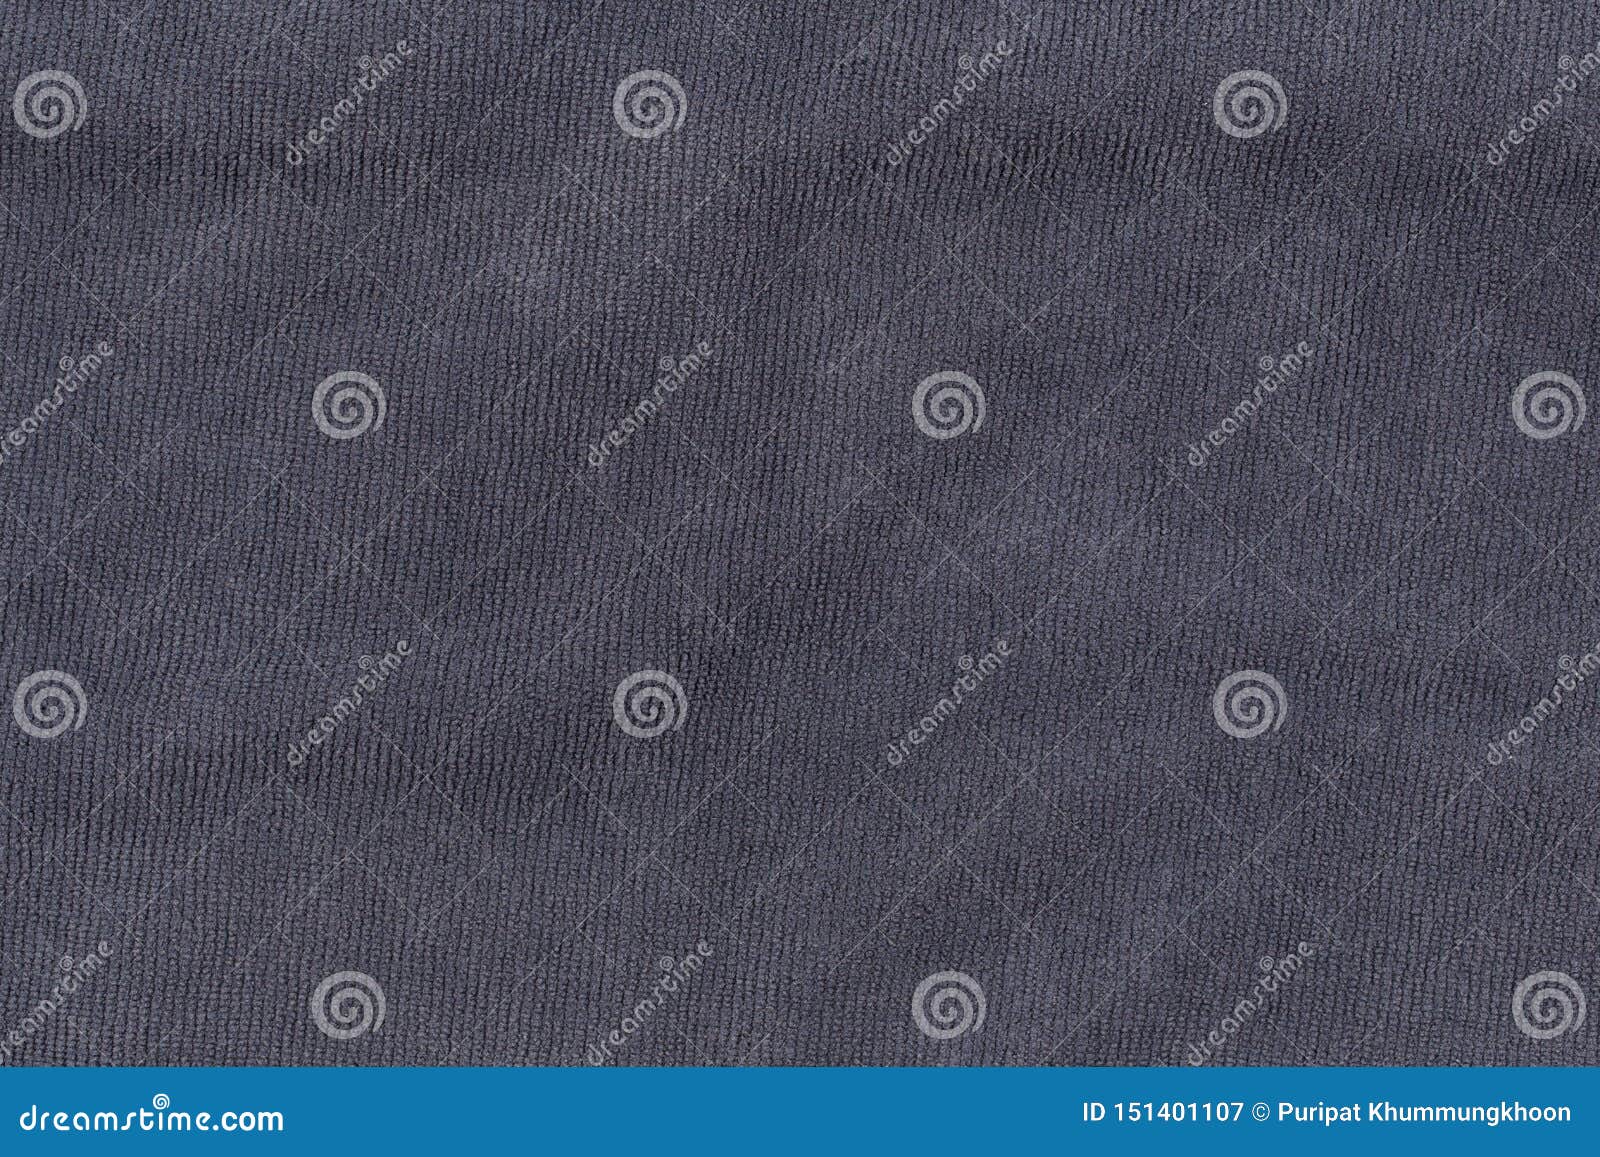 Gray Bath Towel Texture For Background And Design Stock Image - Image ...